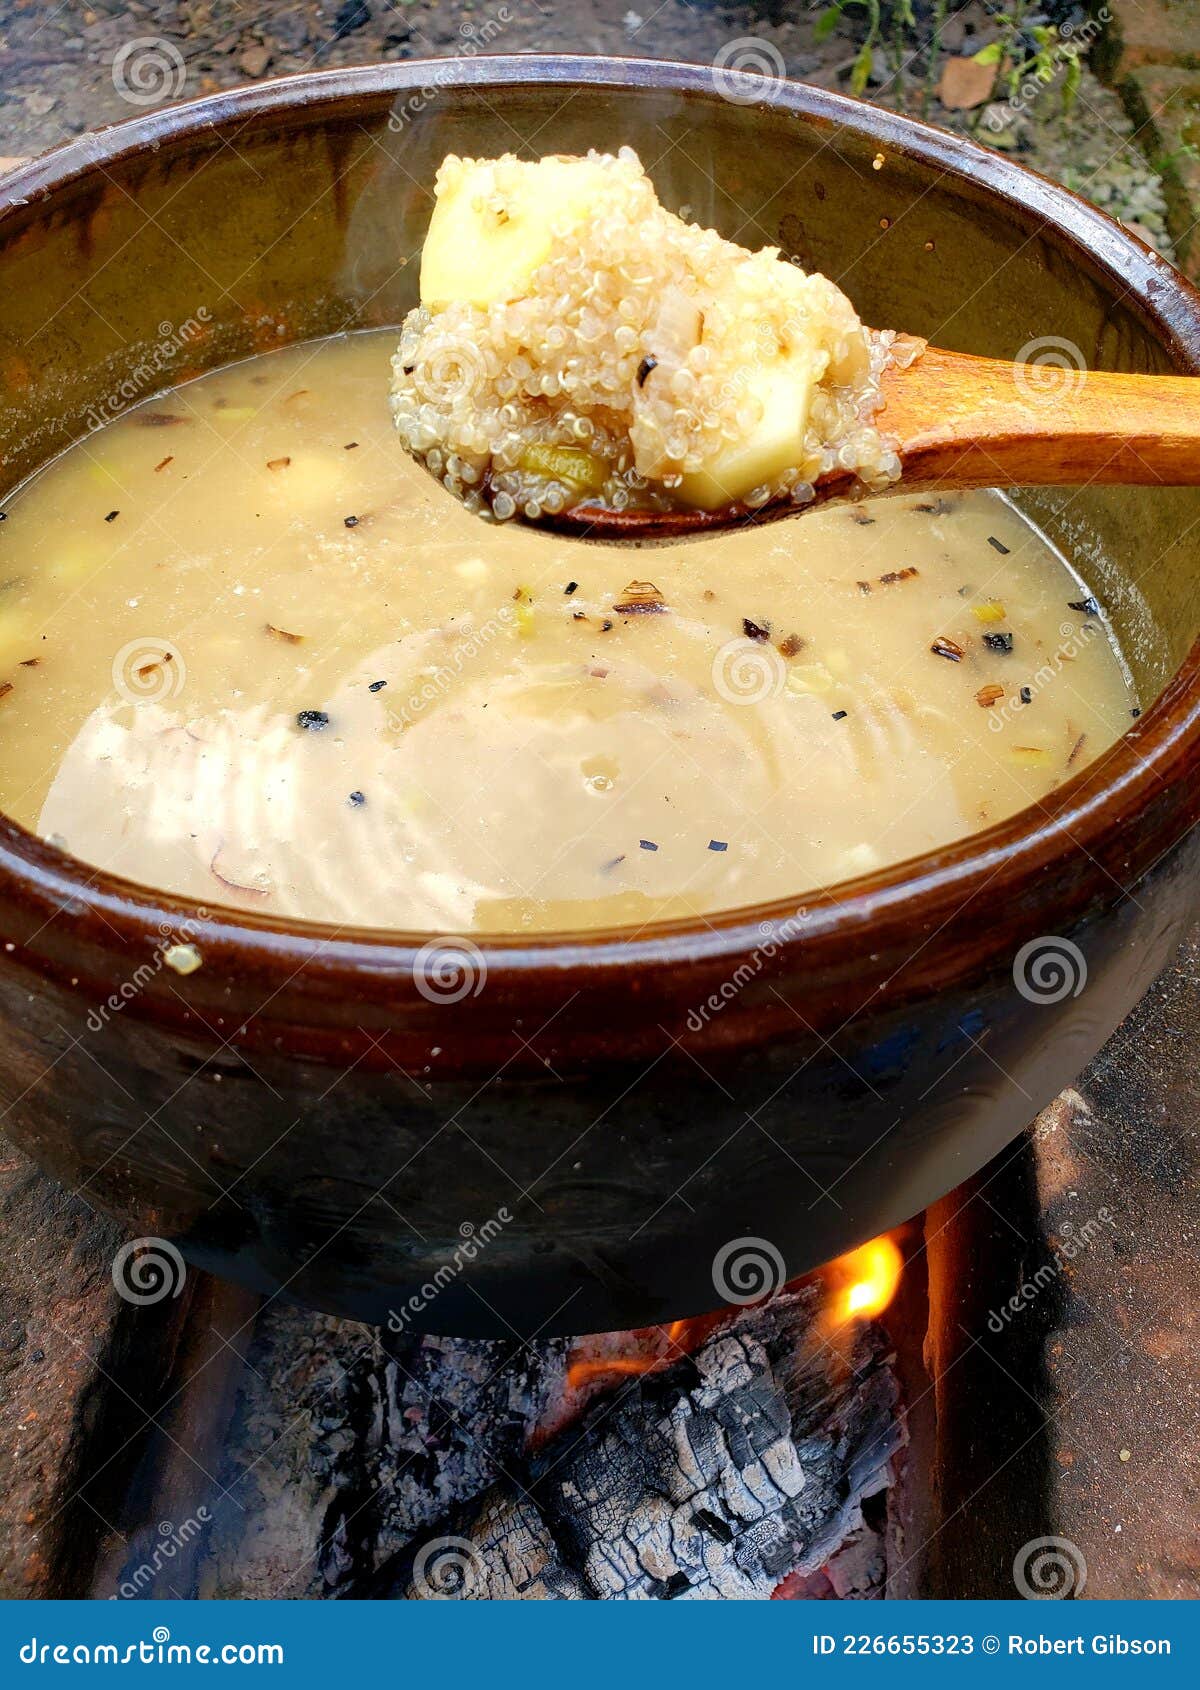 quinua soup is the best cooked with fire